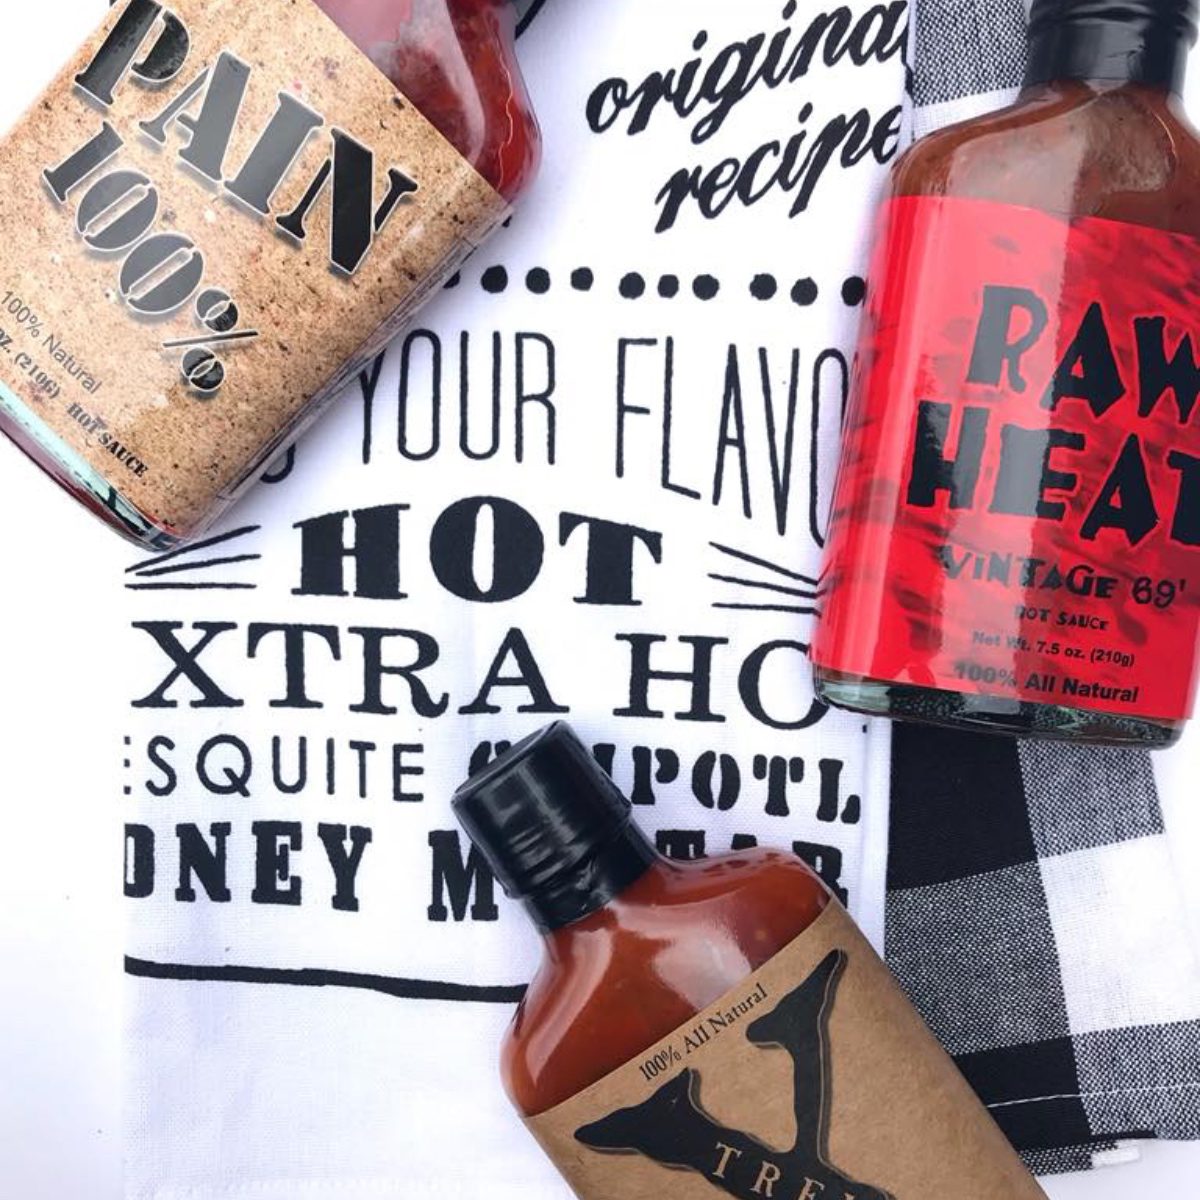 <p class=""><strong><a class="SWhtmlLink" href="http://www.originaljuan.com" rel="noopener">Original Juan</a>, Kansas City</strong></p> <p>If you're looking for artisanal hot sauces with a serious burn, Original Juan's <em>Pain Is Good</em> line is absolutely the choice for you. Every sauce is kettle-cooked in small batches, keeping the process handcrafted.</p> <p><a class="SWhtmlLink" href="https://www.tasteofhome.com/article/how-to-make-homemade-hot-sauce/" rel="noopener">Learn how to make your own homemade hot sauce with our quick and easy recipes.</a></p>